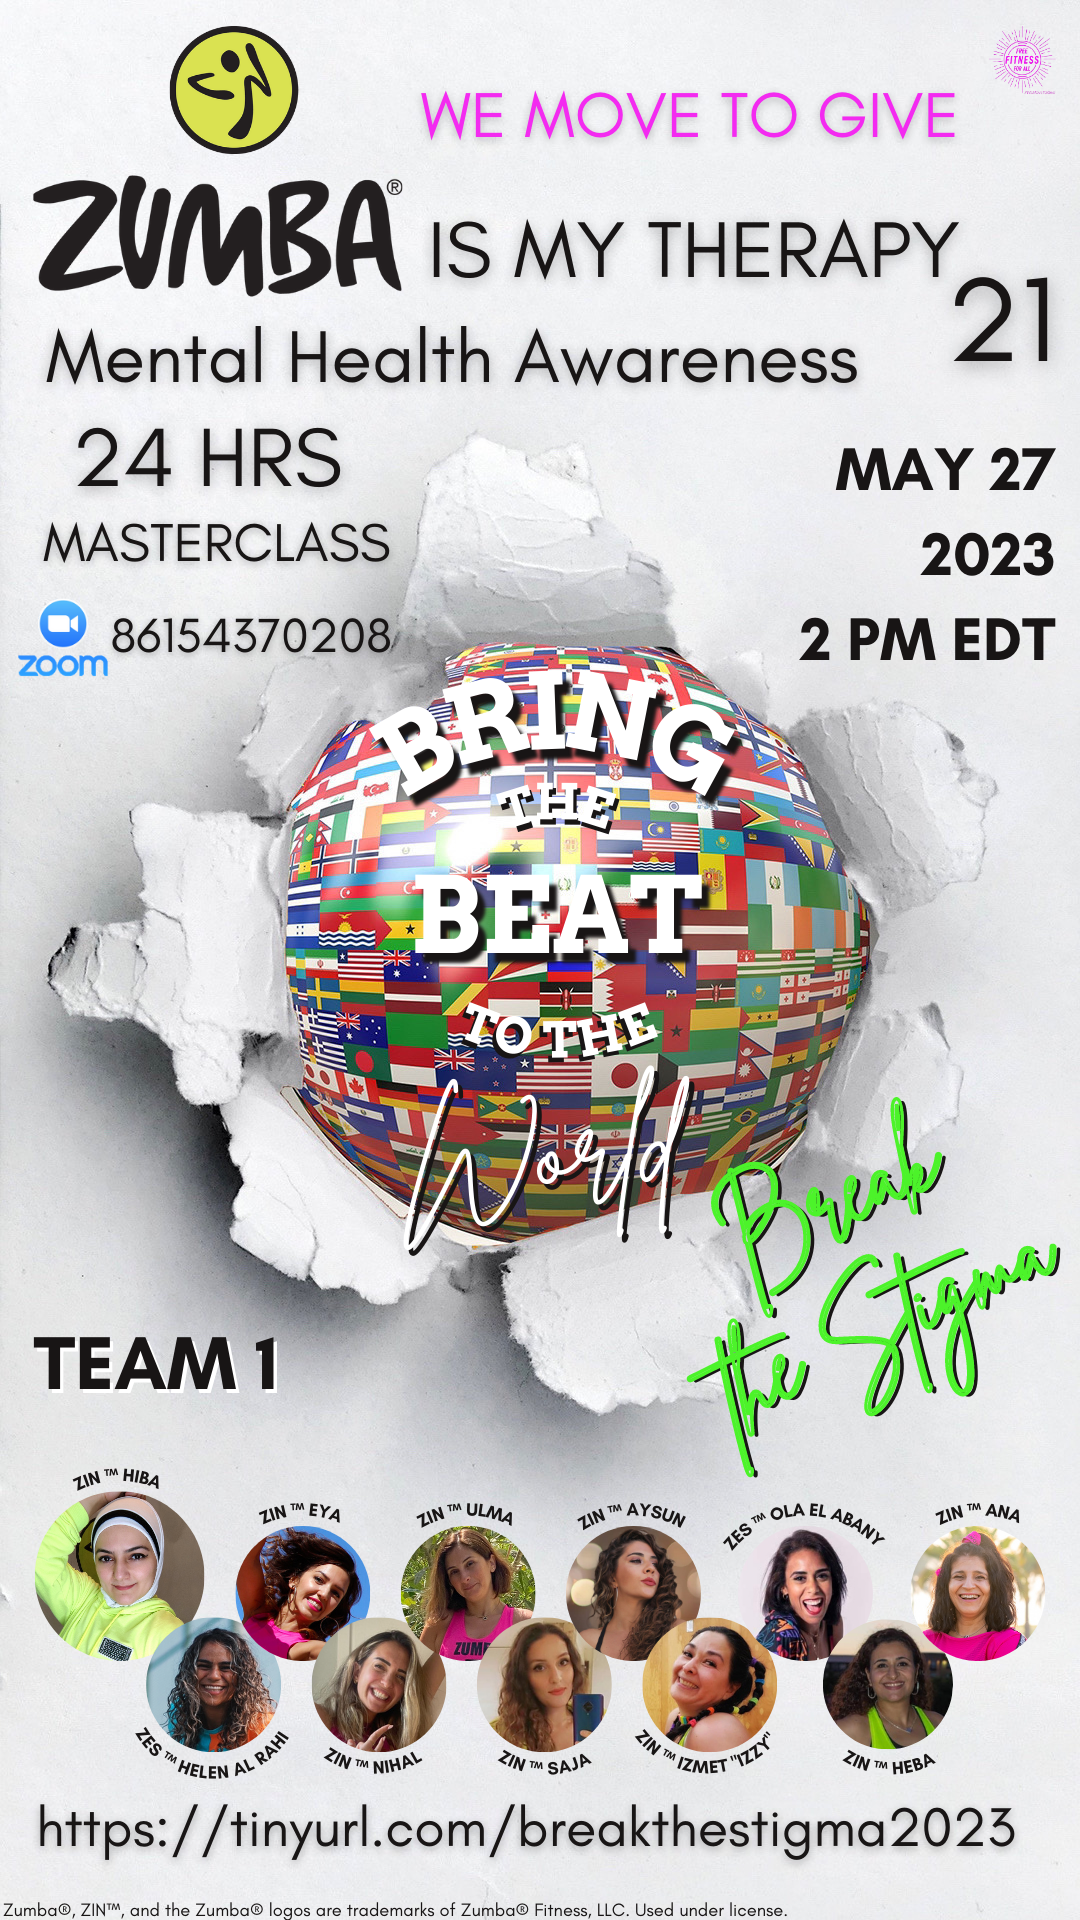 Team 1 - May 27th 2 PM EDT